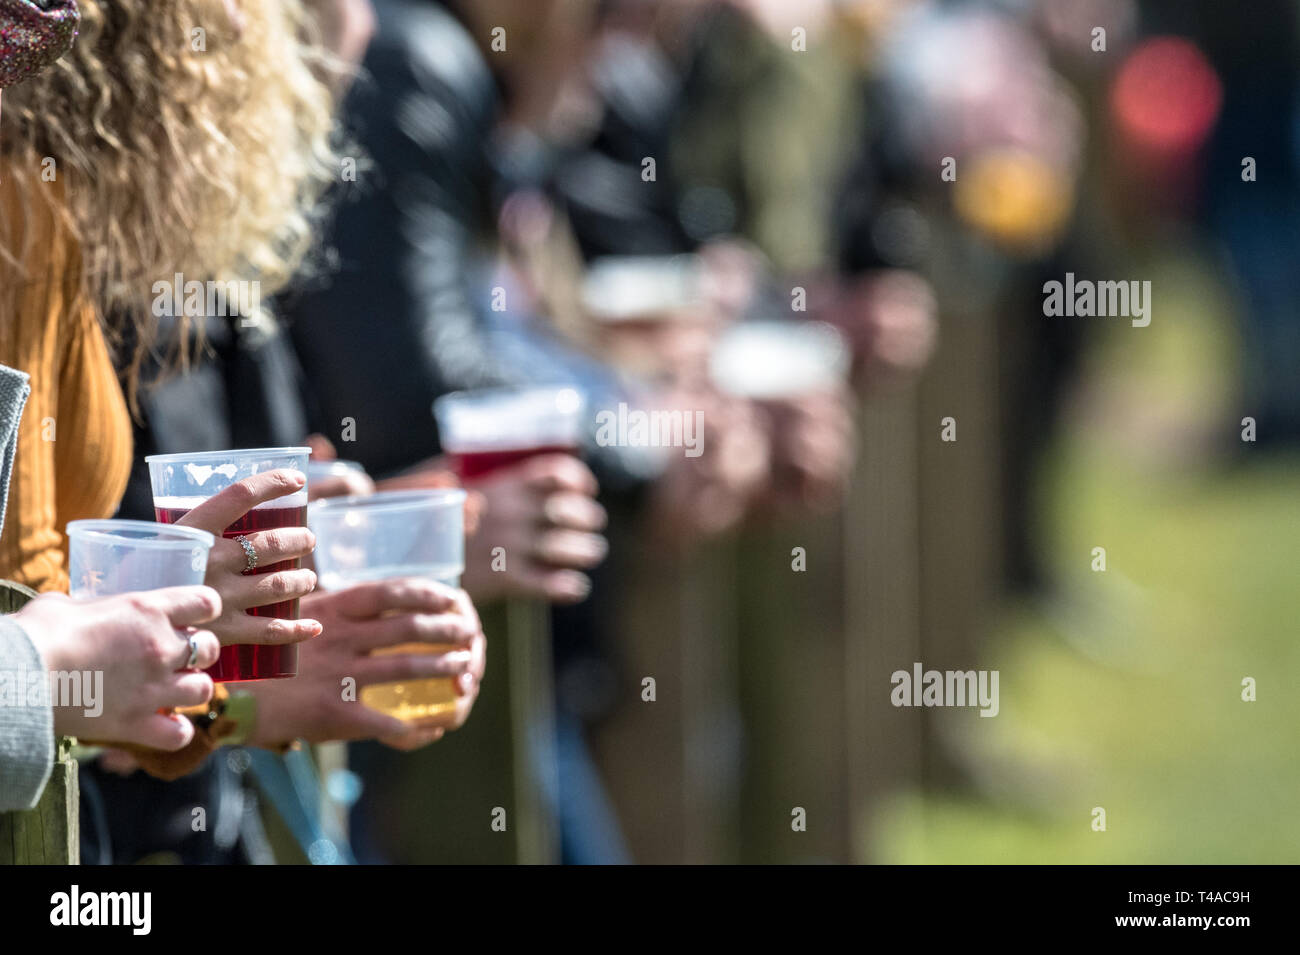 Men and women at a Rugby game holding pints of beer. Stock Photo